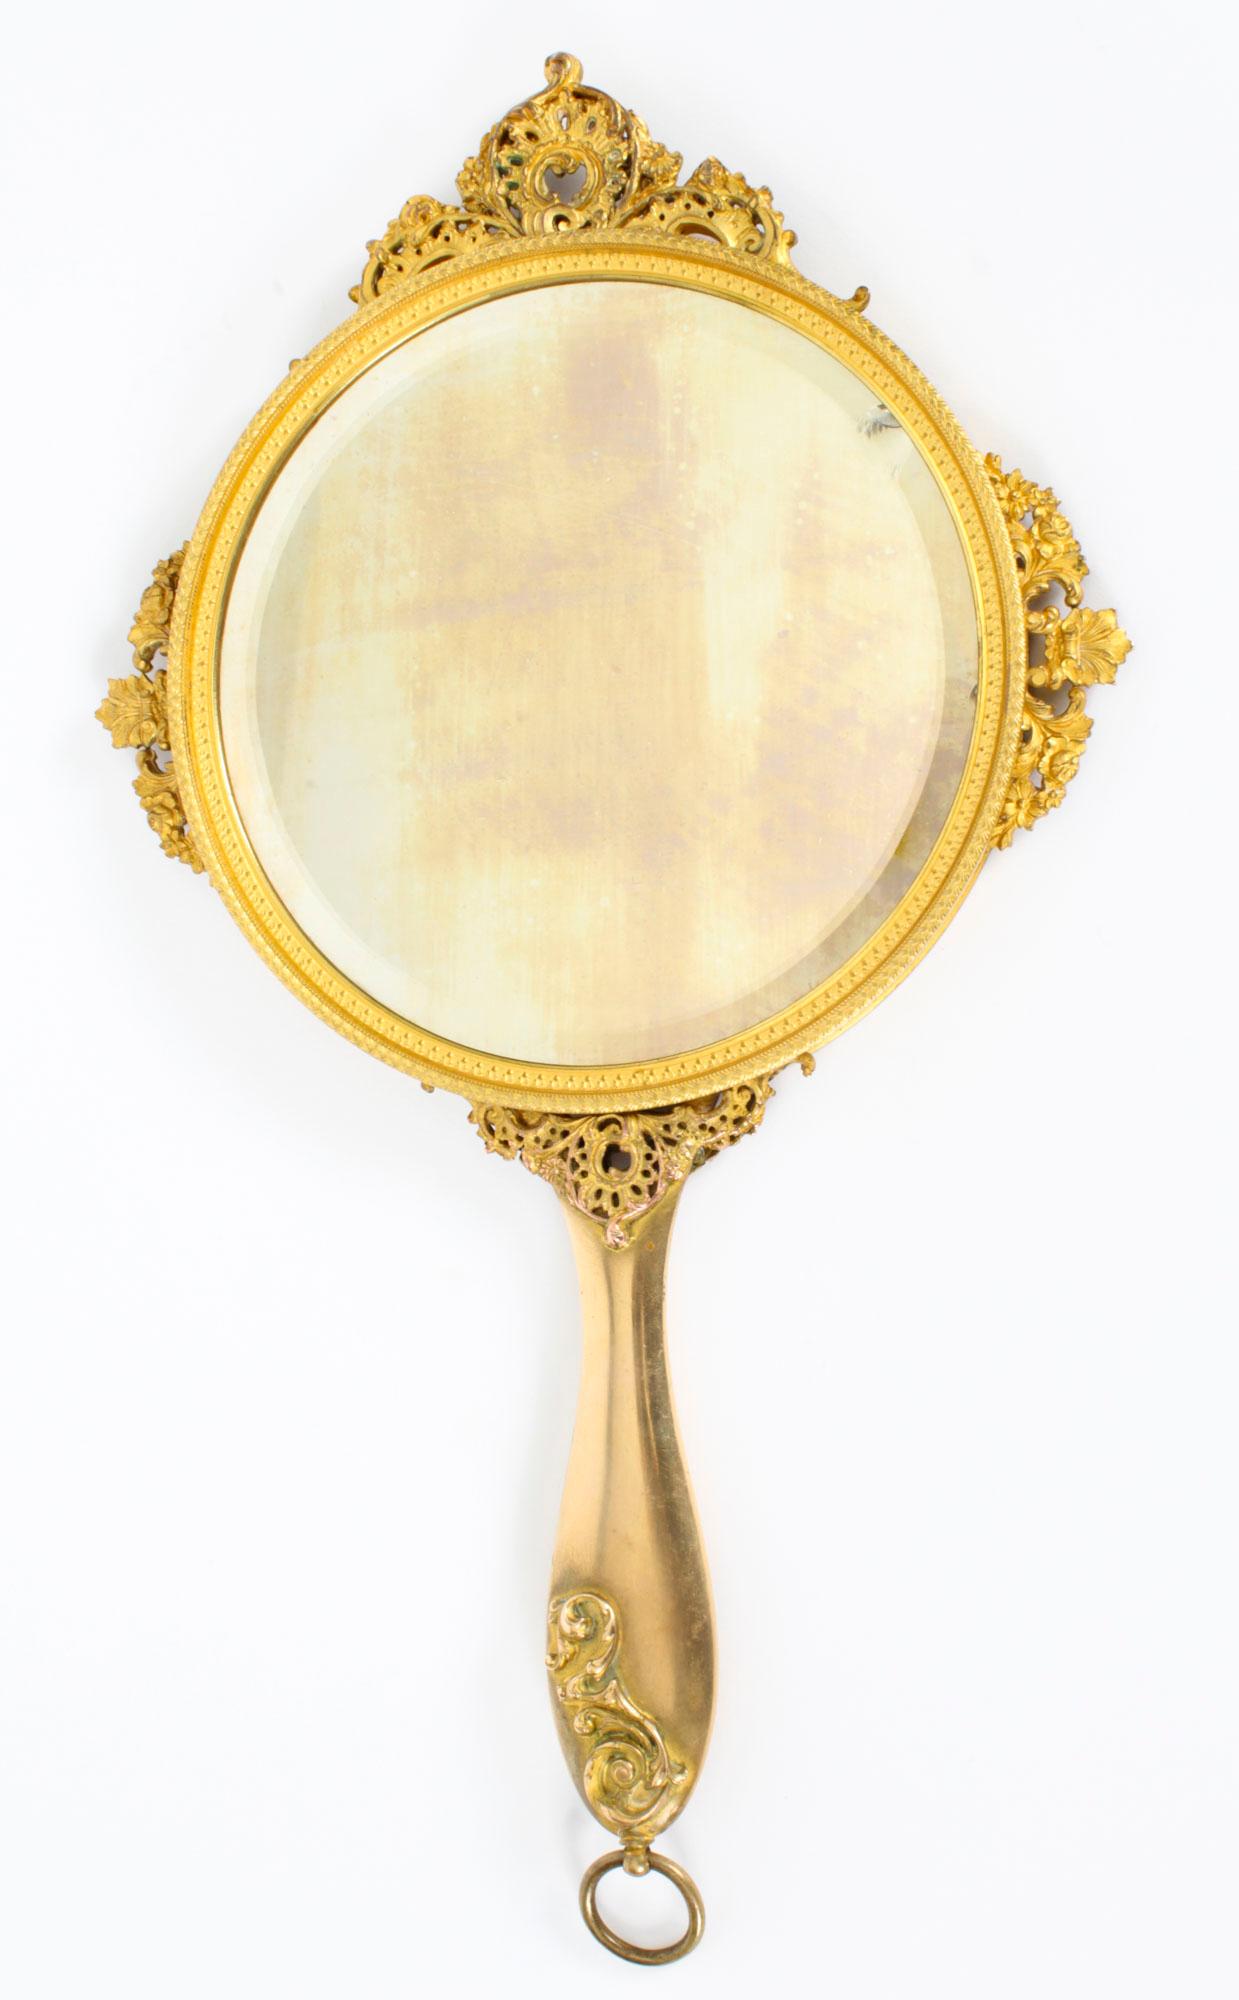 Antique French Limoges Ormolu Hand-Mirror, Signed Joseph Meissonnier 19th C For Sale 8